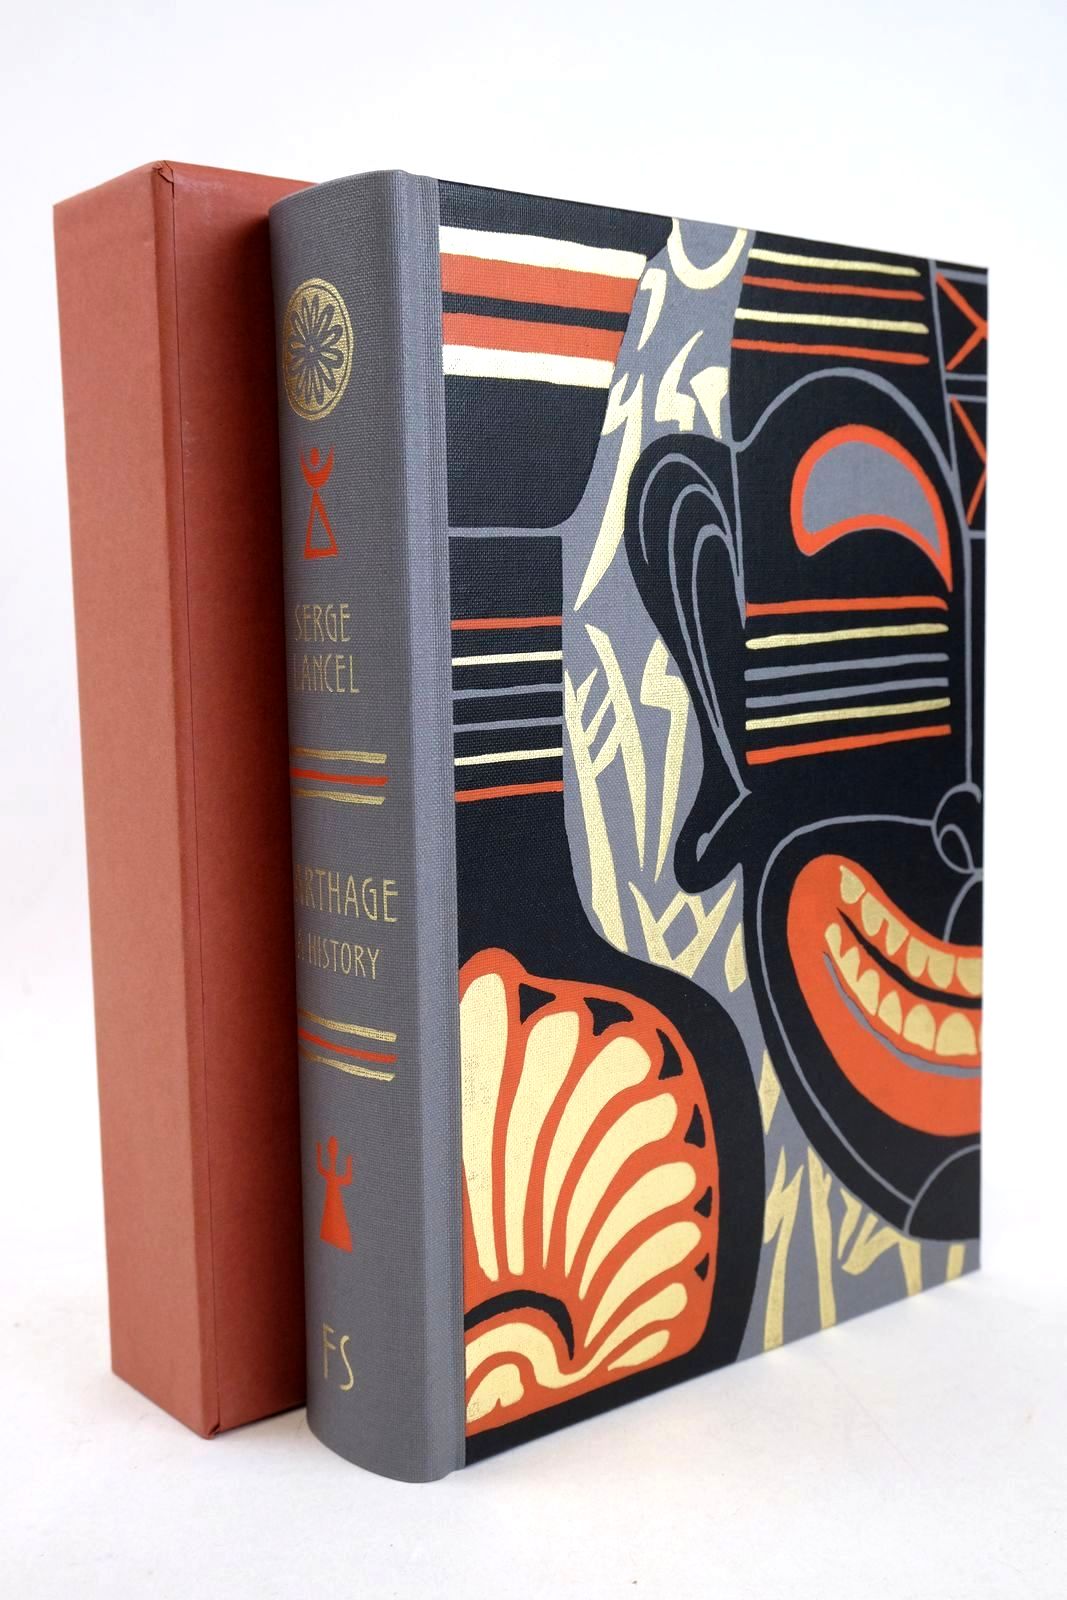 Photo of CARTHAGE: A HISTORY written by Lancel, Serge published by Folio Society (STOCK CODE: 1327590)  for sale by Stella & Rose's Books